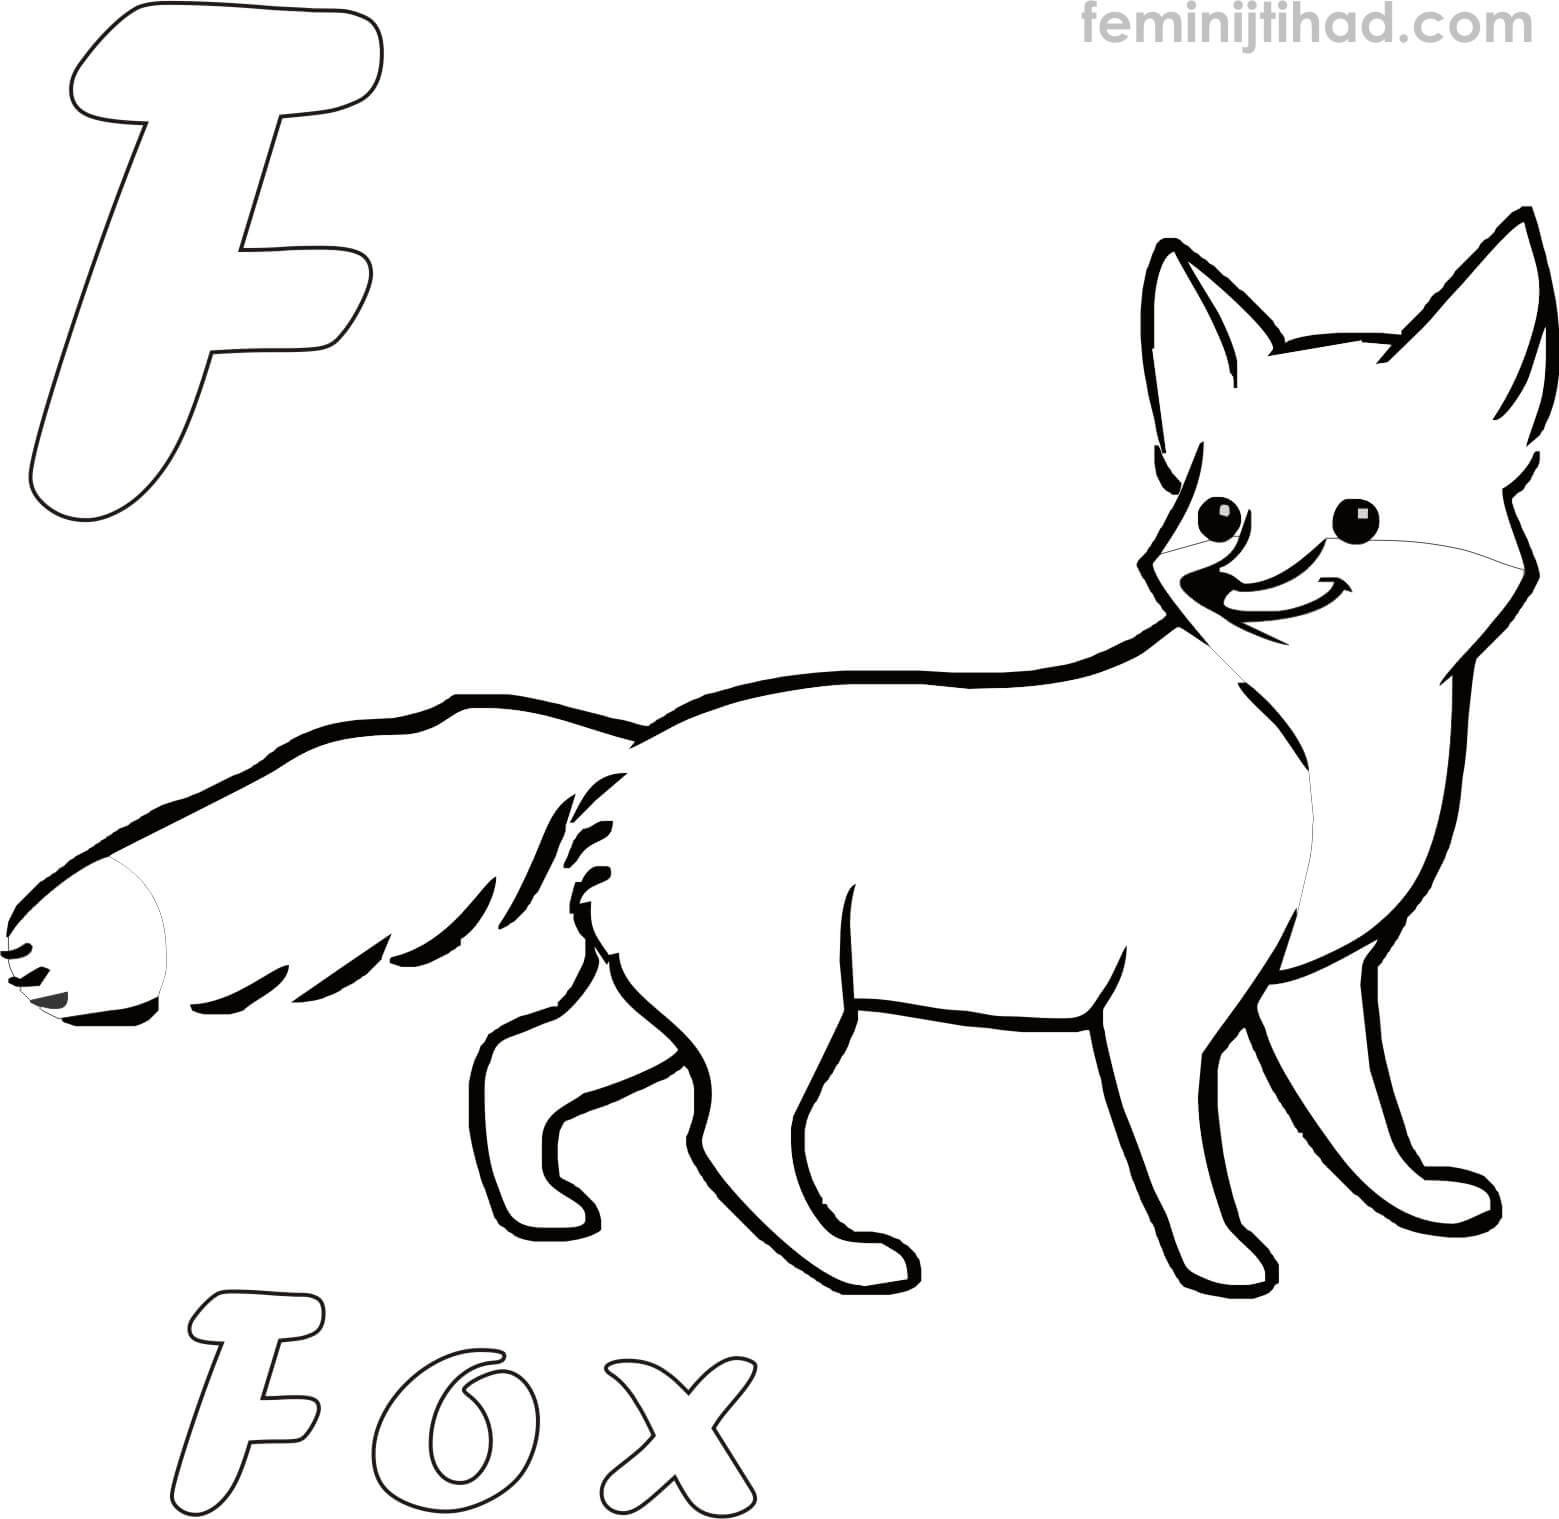 Baby Foxes Coloring Pages
 Cute Baby Fox Drawing at GetDrawings